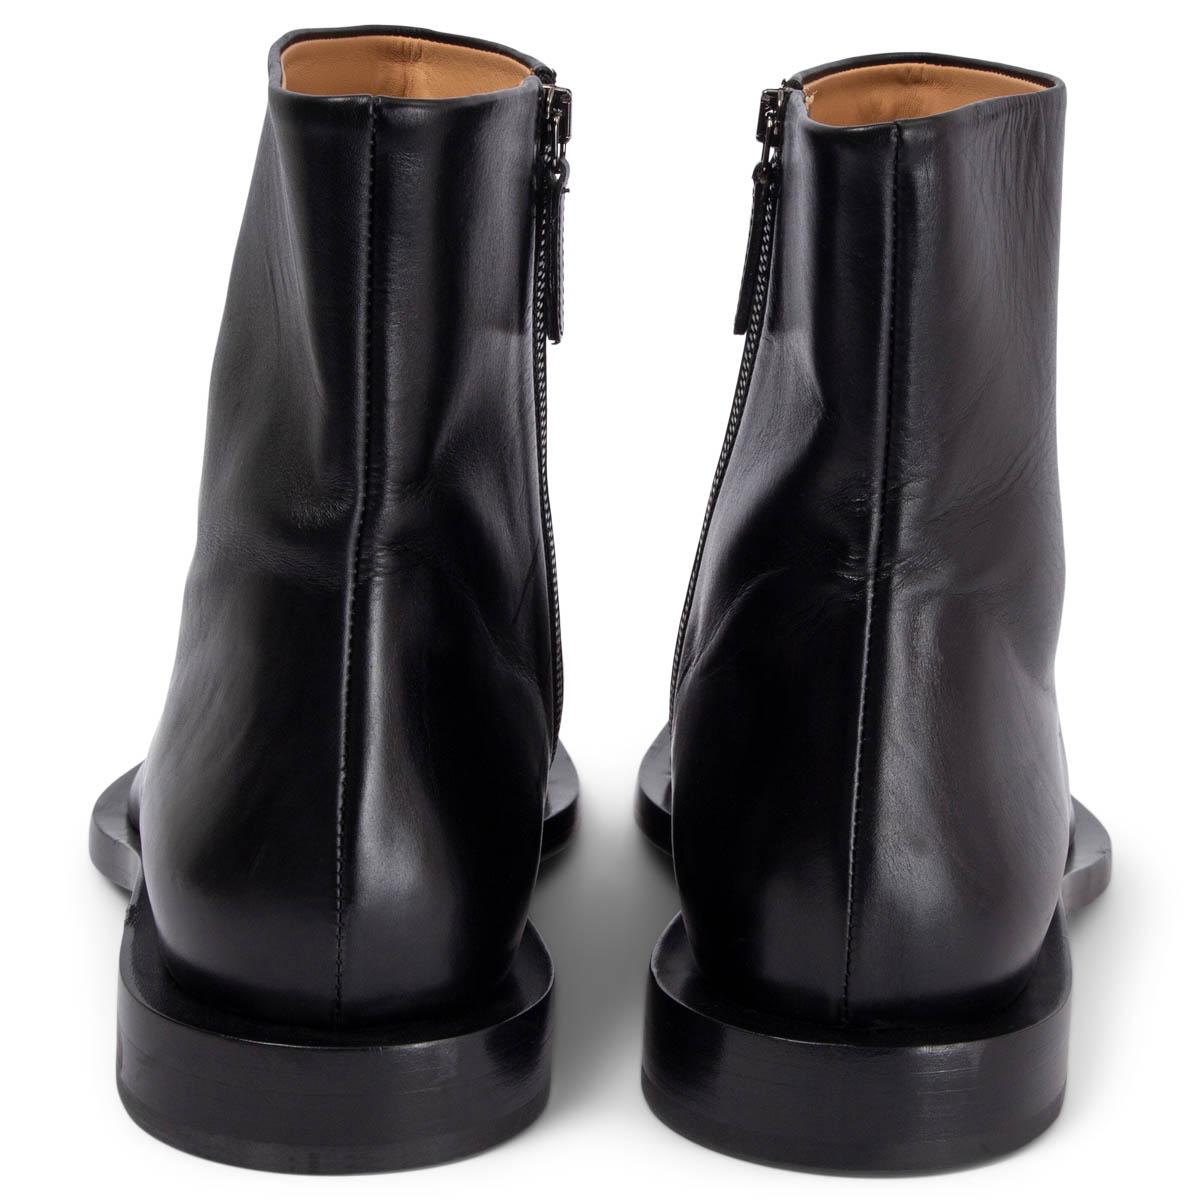 JIL SANDER black leather FLAT ANKLE Boots Shoes 39 In Excellent Condition For Sale In Zürich, CH